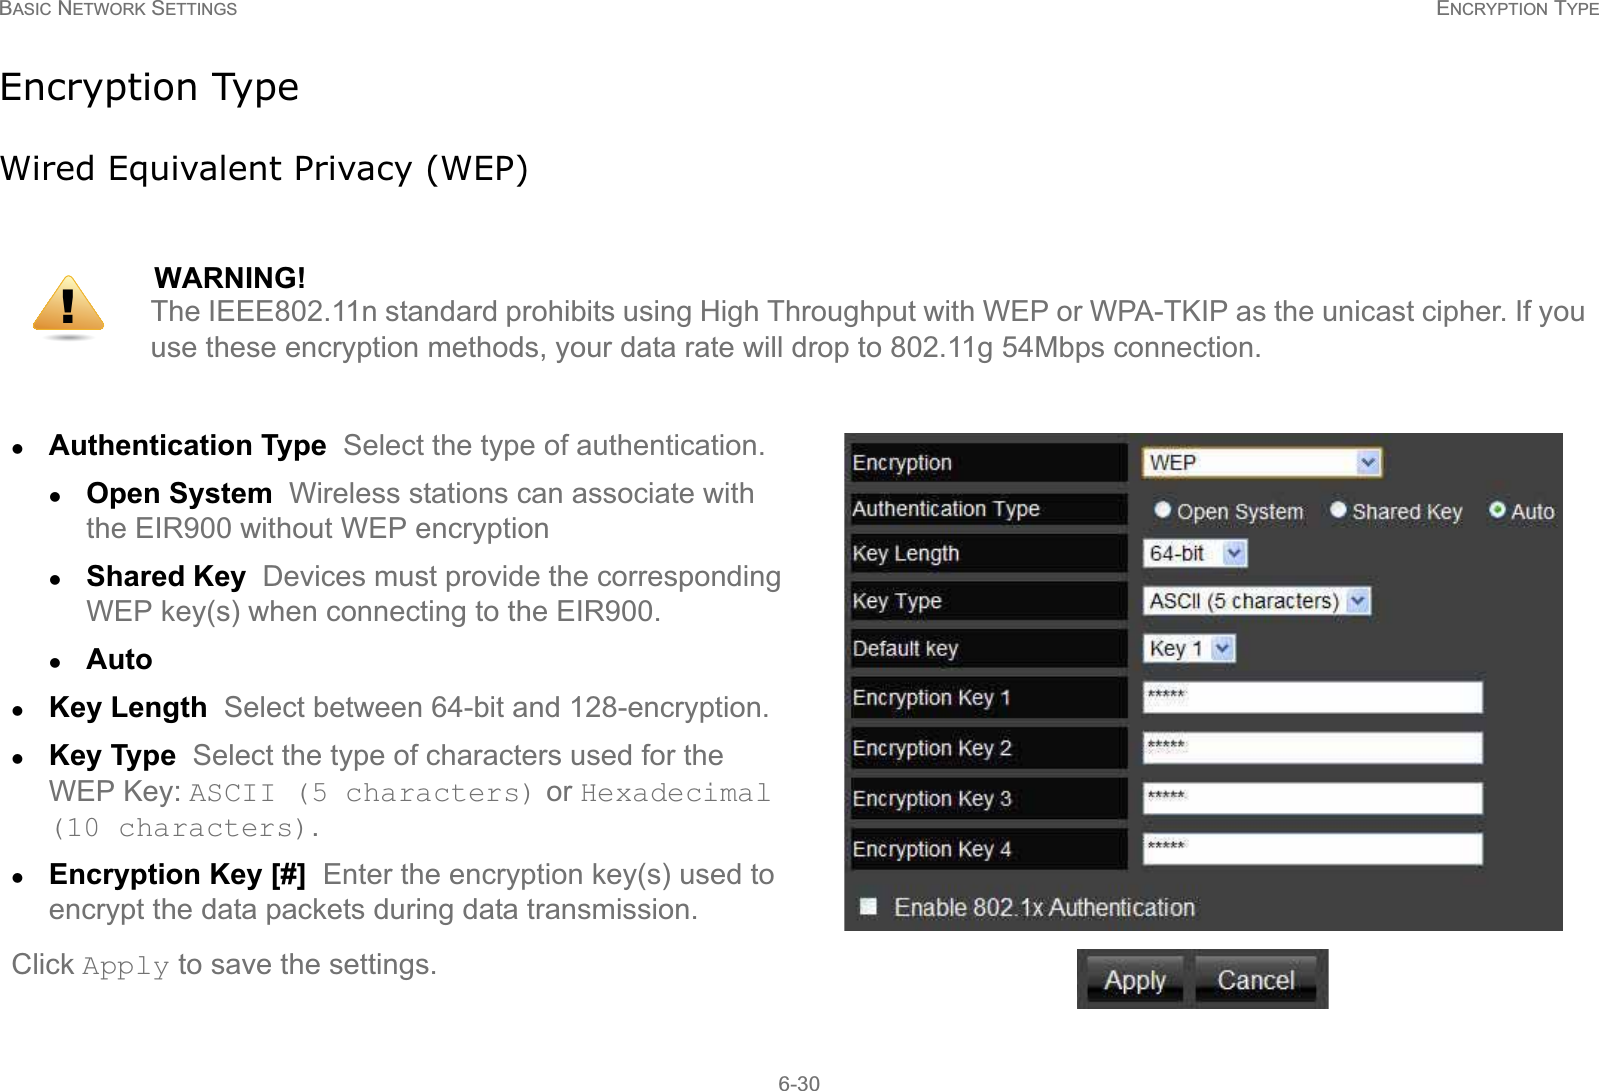 BASIC NETWORK SETTINGS ENCRYPTION TYPE6-30Encryption TypeWired Equivalent Privacy (WEP)WARNING!The IEEE802.11n standard prohibits using High Throughput with WEP or WPA-TKIP as the unicast cipher. If you use these encryption methods, your data rate will drop to 802.11g 54Mbps connection.zAuthentication Type  Select the type of authentication. zOpen System  Wireless stations can associate with the EIR900 without WEP encryptionzShared Key  Devices must provide the corresponding WEP key(s) when connecting to the EIR900.zAuto  zKey Length  Select between 64-bit and 128-encryption.zKey Type  Select the type of characters used for the WEP Key: ASCII (5 characters) or Hexadecimal (10 characters).zEncryption Key [#]  Enter the encryption key(s) used to encrypt the data packets during data transmission.Click Apply to save the settings.!